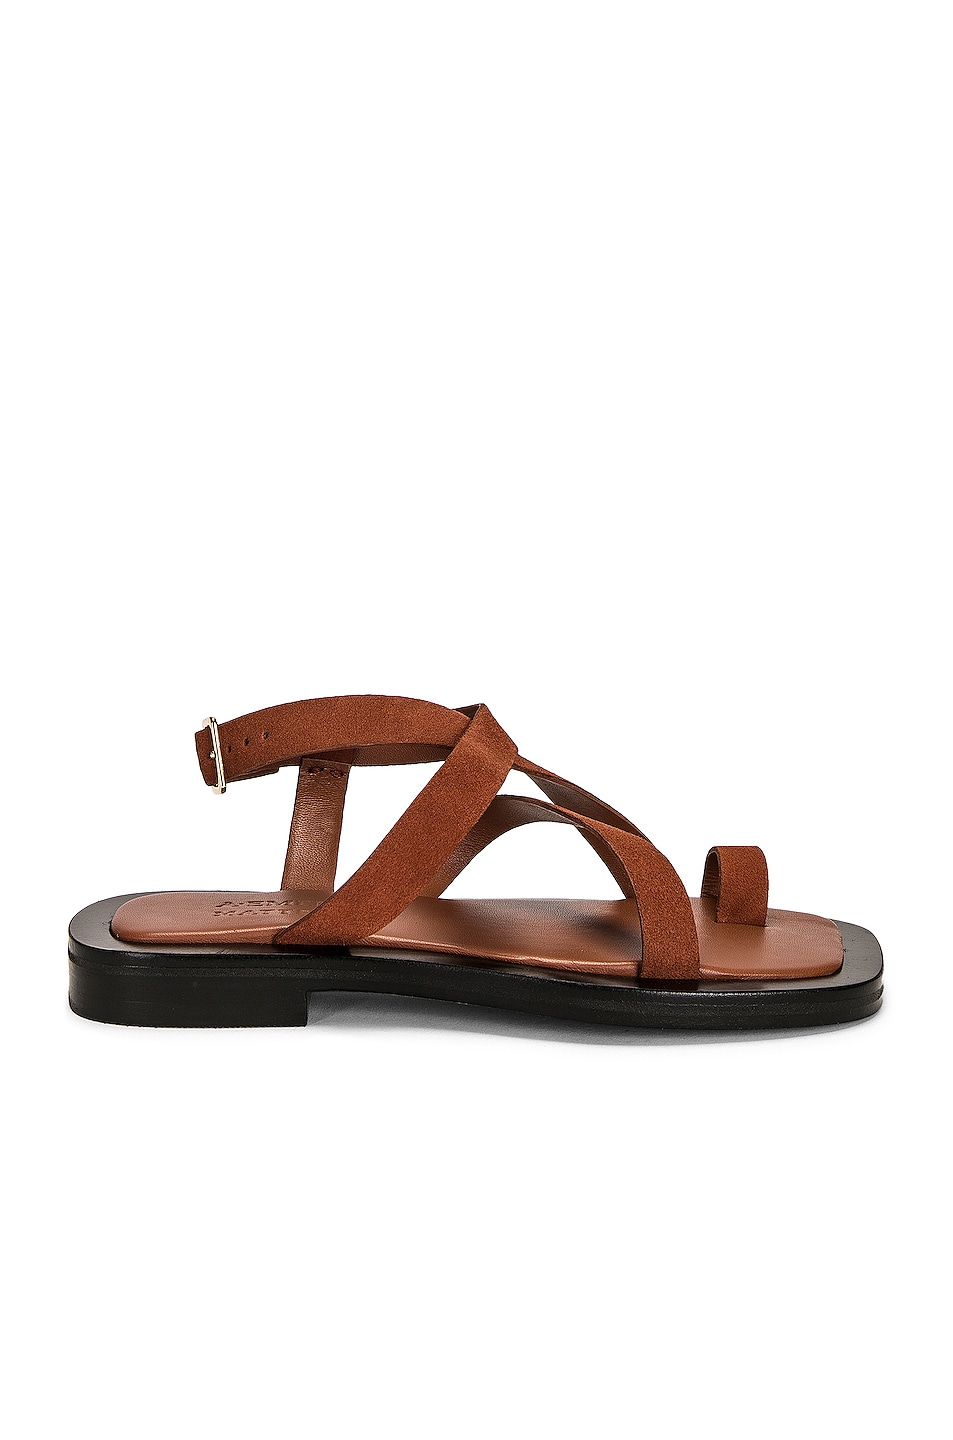 Image 1 of A.EMERY x Matteau Spargi Sandal in Paprika Suede